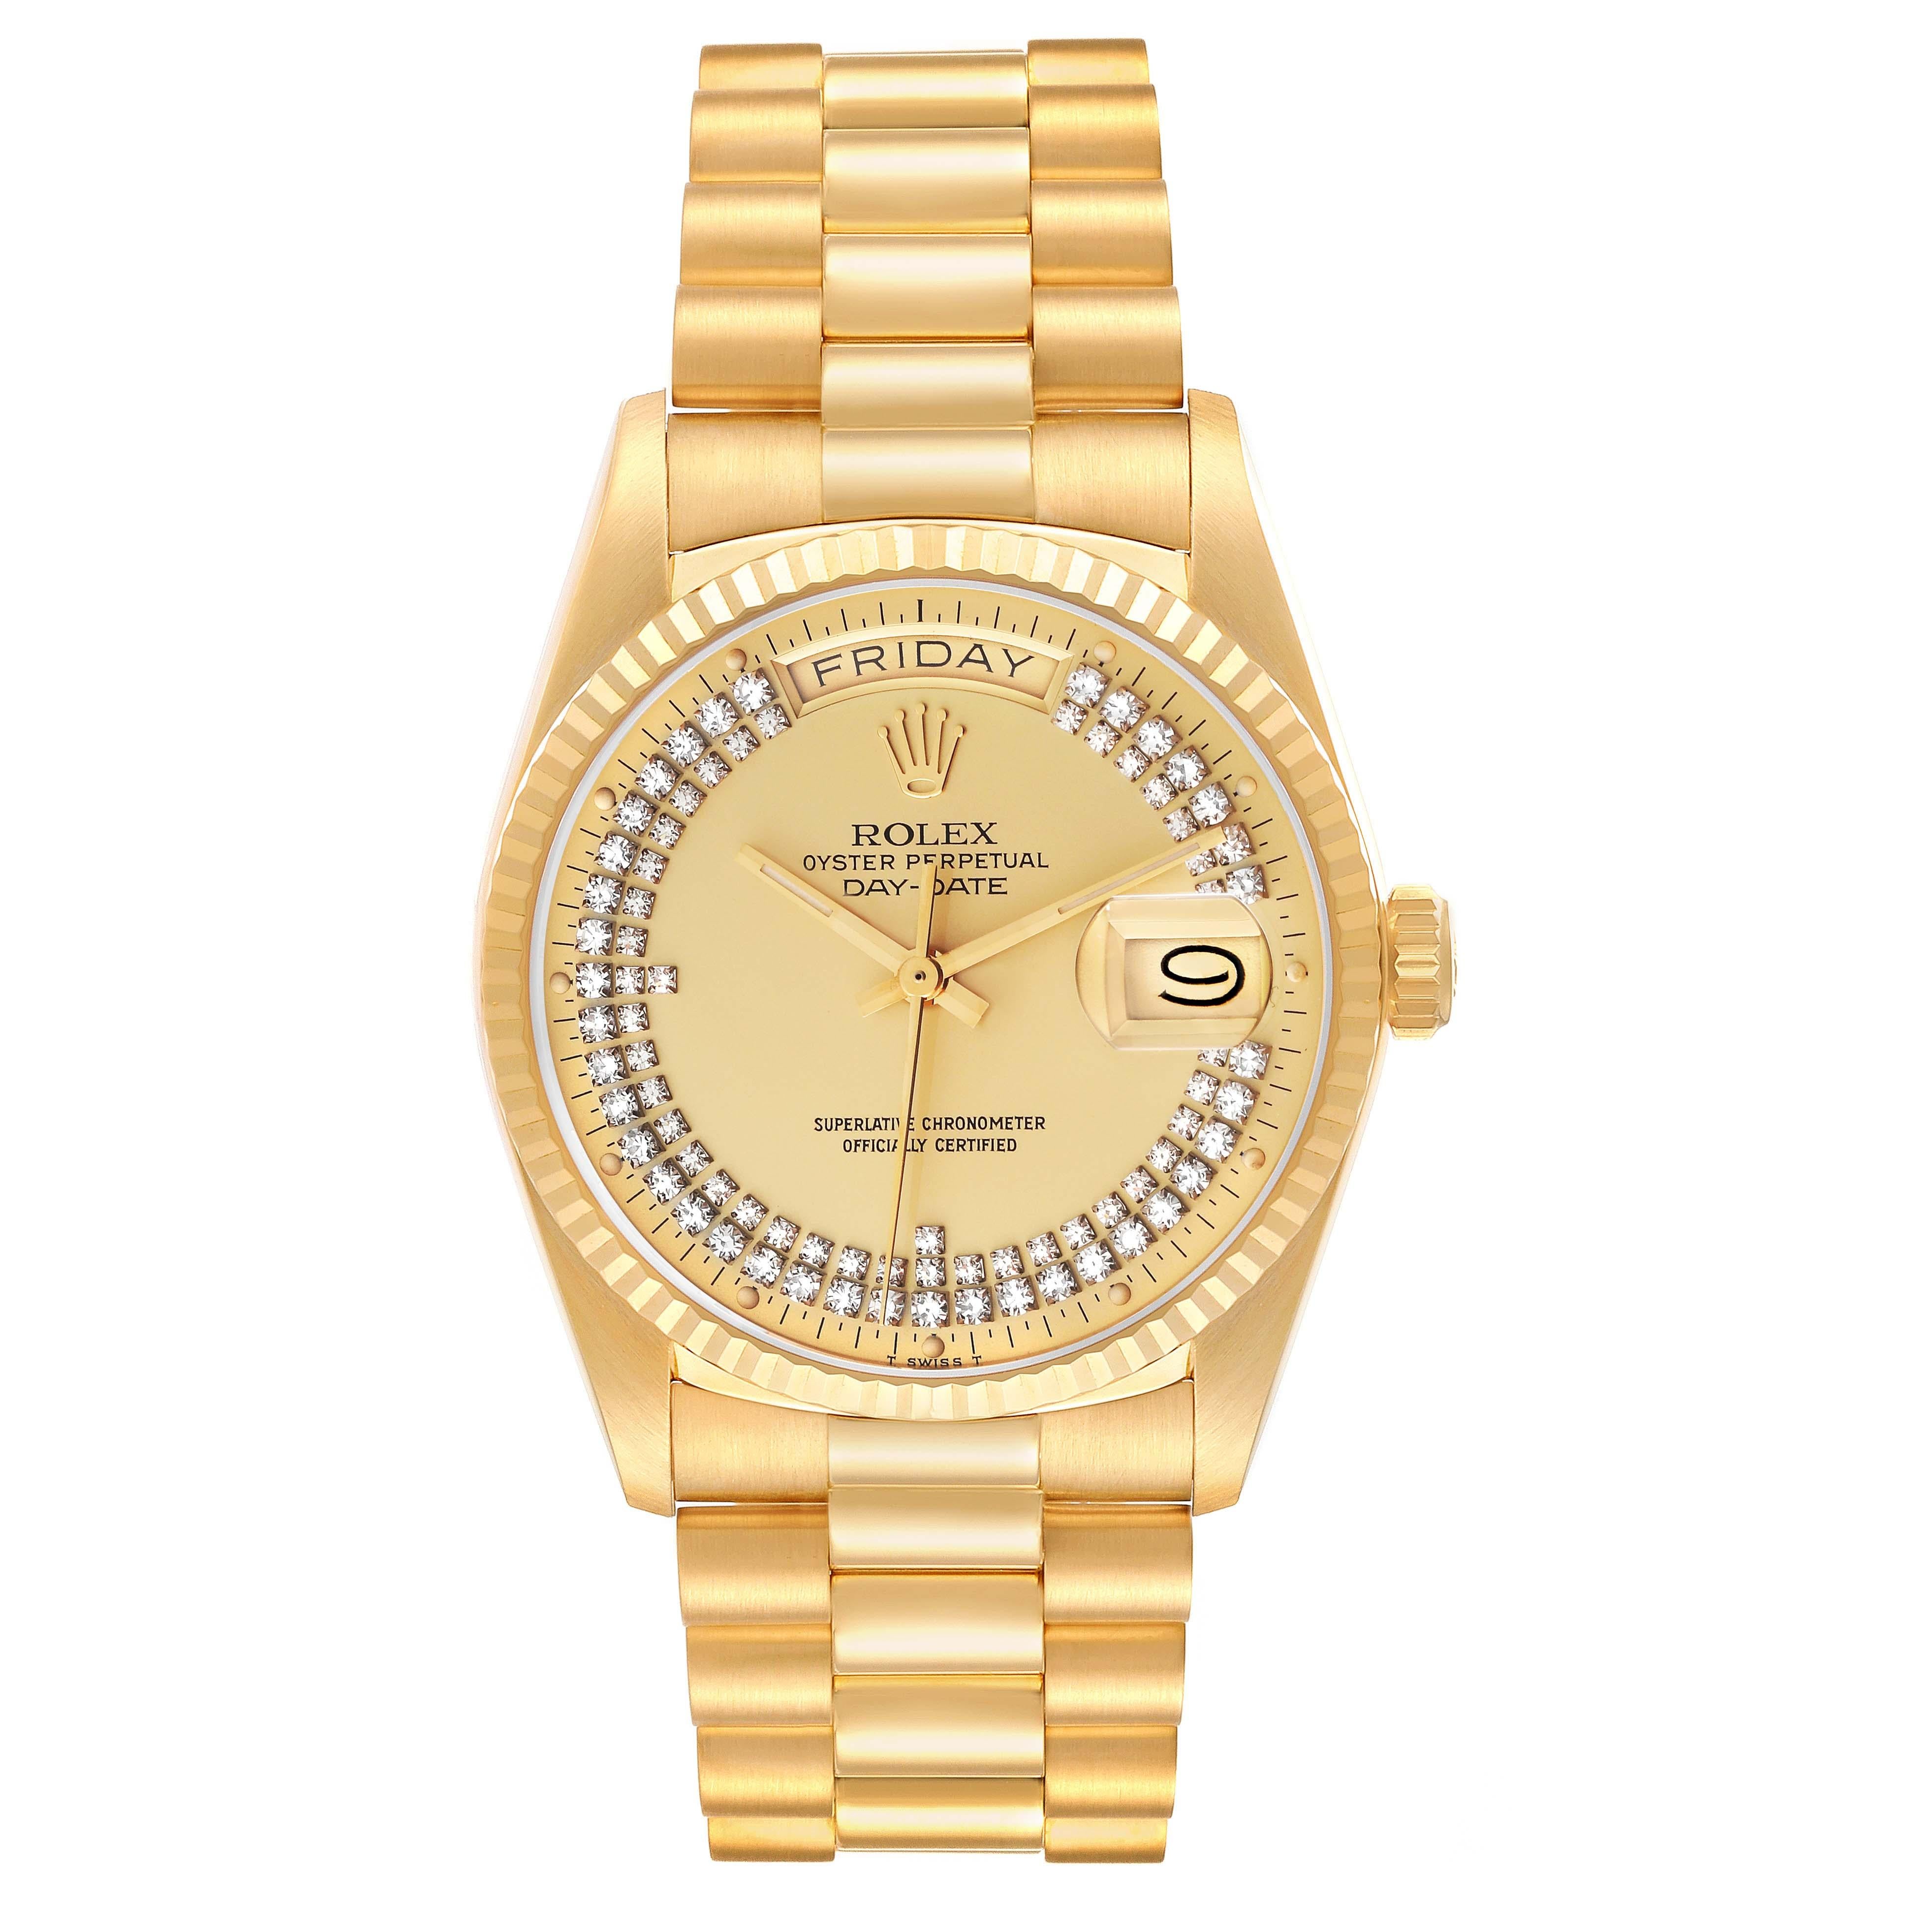 Rolex President Day-Date Yellow Gold String Diamond Dial Mens Watch 18038. Officially certified chronometer automatic self-winding movement. 18k yellow gold oyster case 36 mm in diameter. Rolex logo on a crown. 18K yellow gold fluted bezel. Scratch